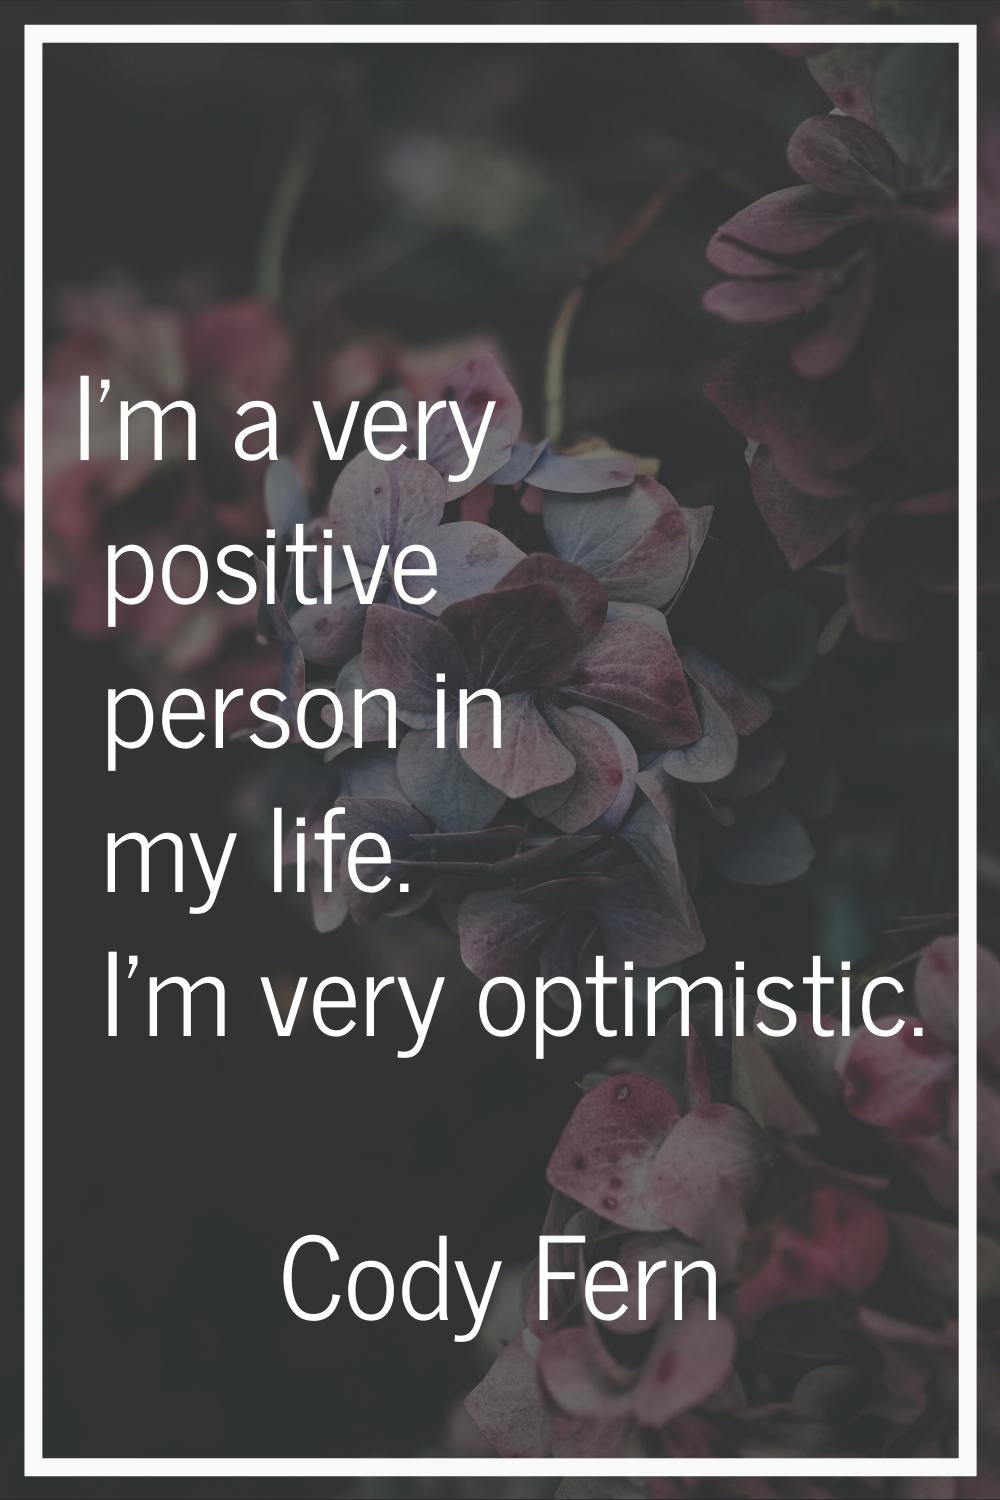 I'm a very positive person in my life. I'm very optimistic.